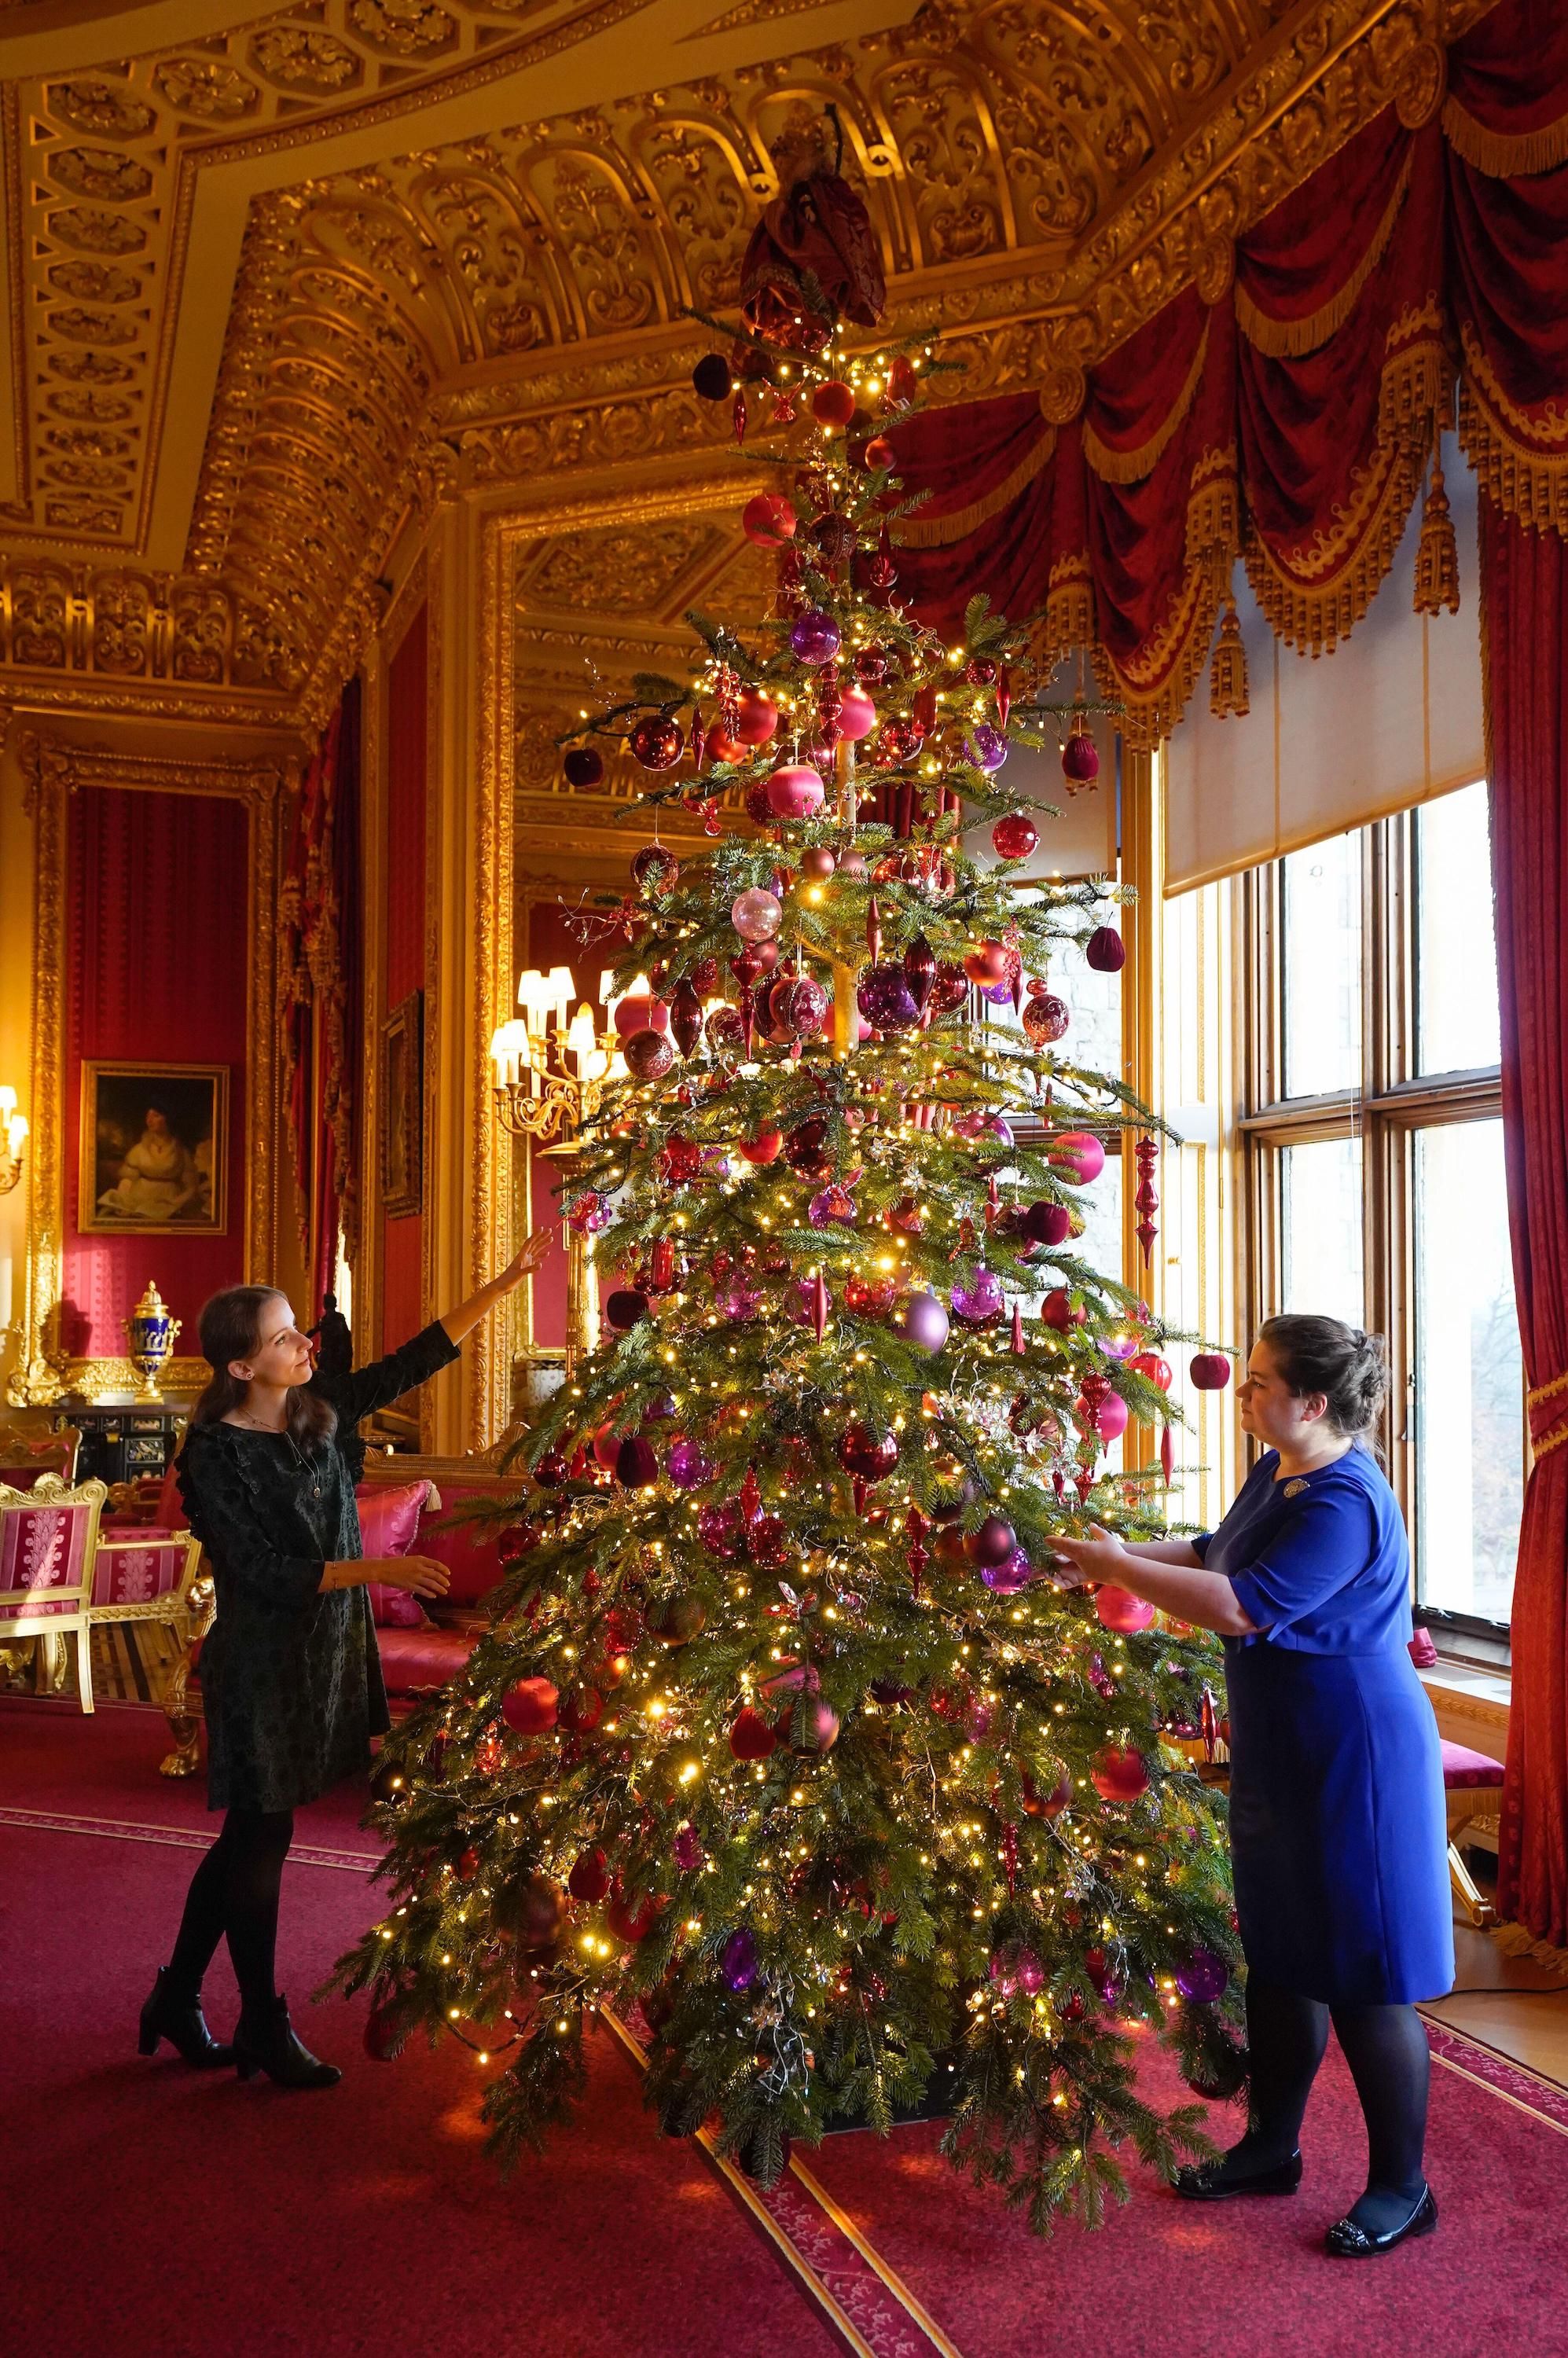 Windsor Castle's Christmas decorations go on display – including a 20ft tree